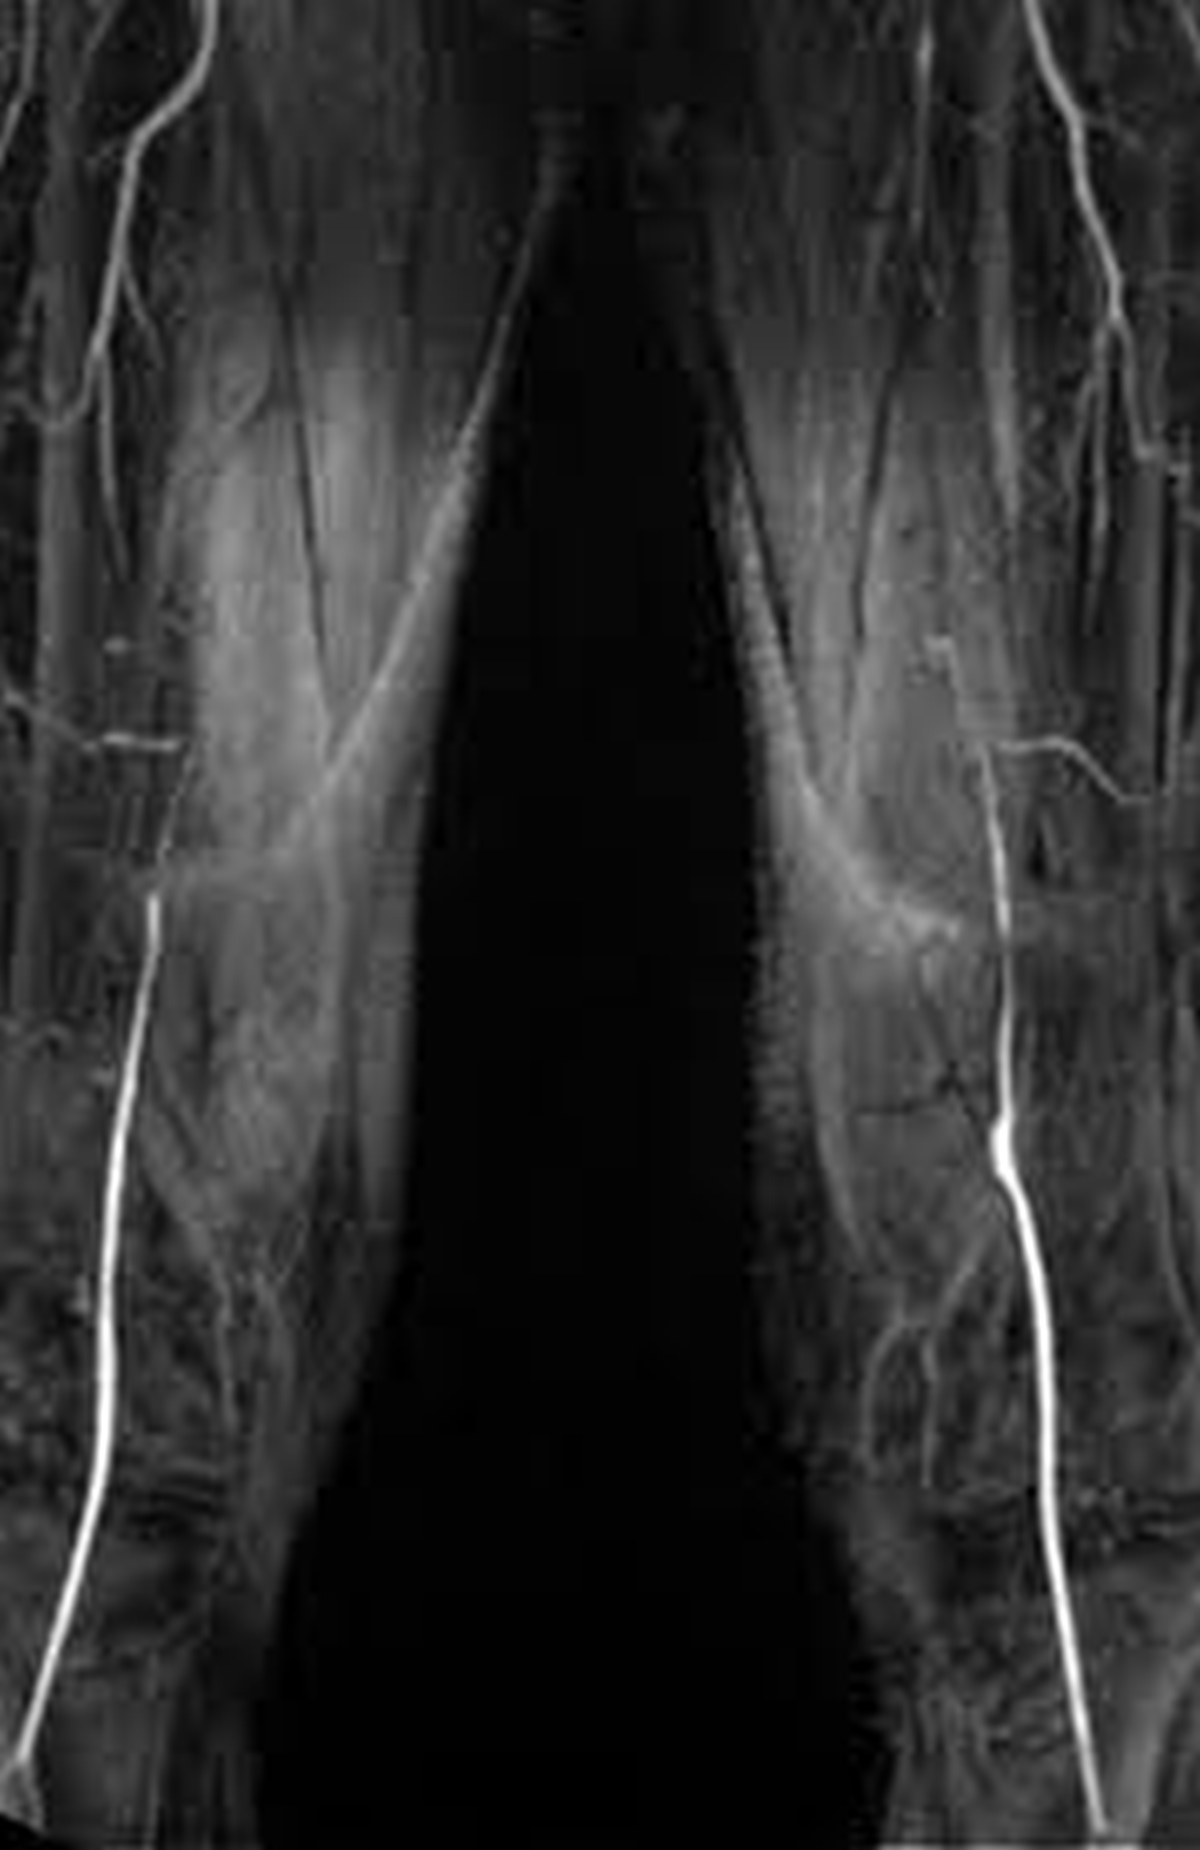 MR angio of femoral and popliteal arteries